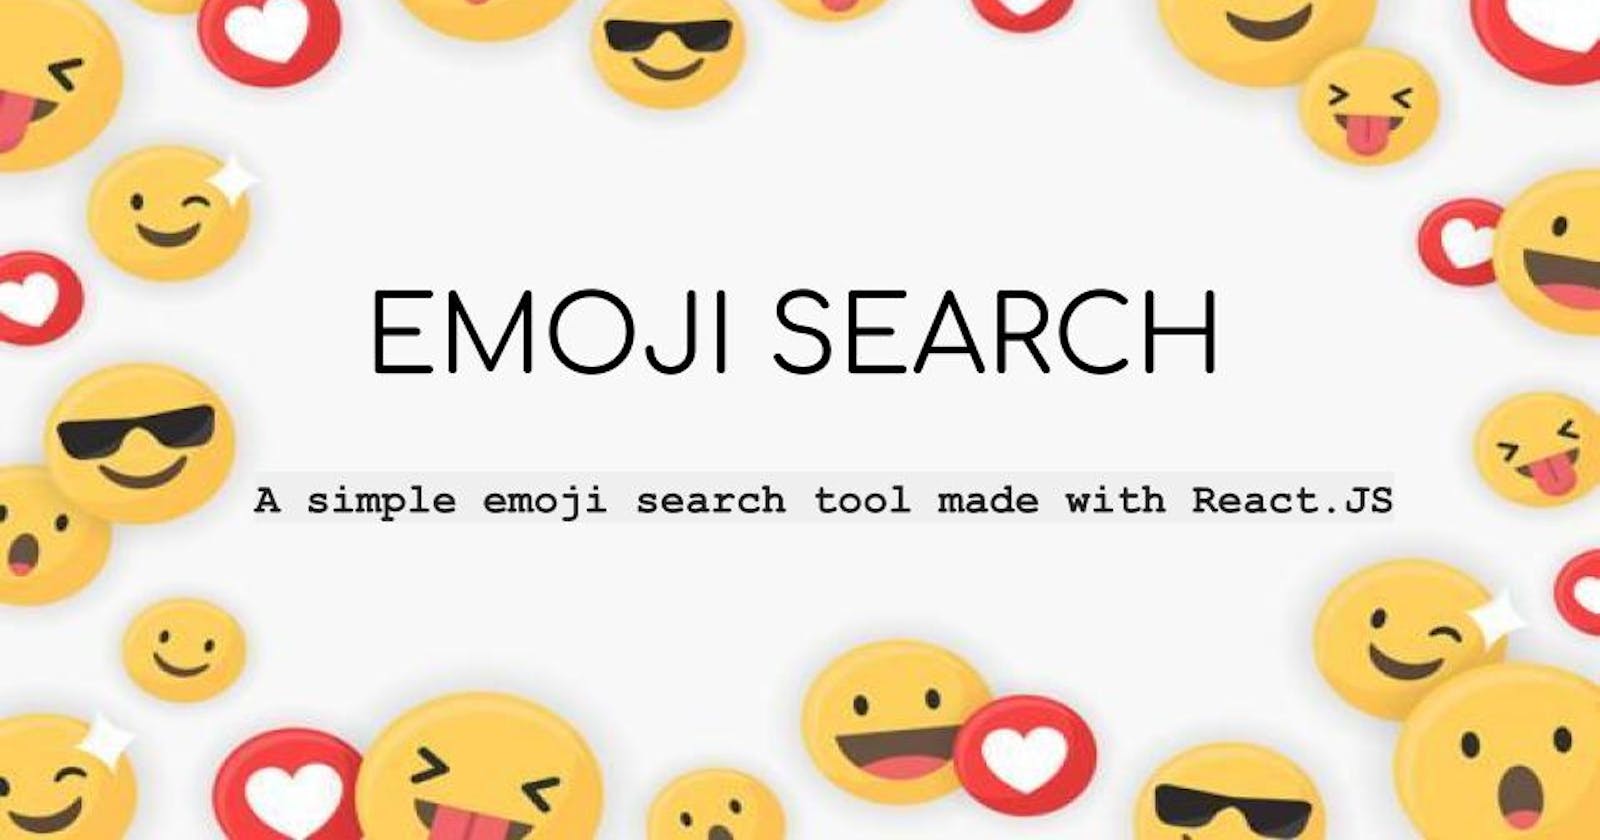 How To Make Emoji Search With React.js